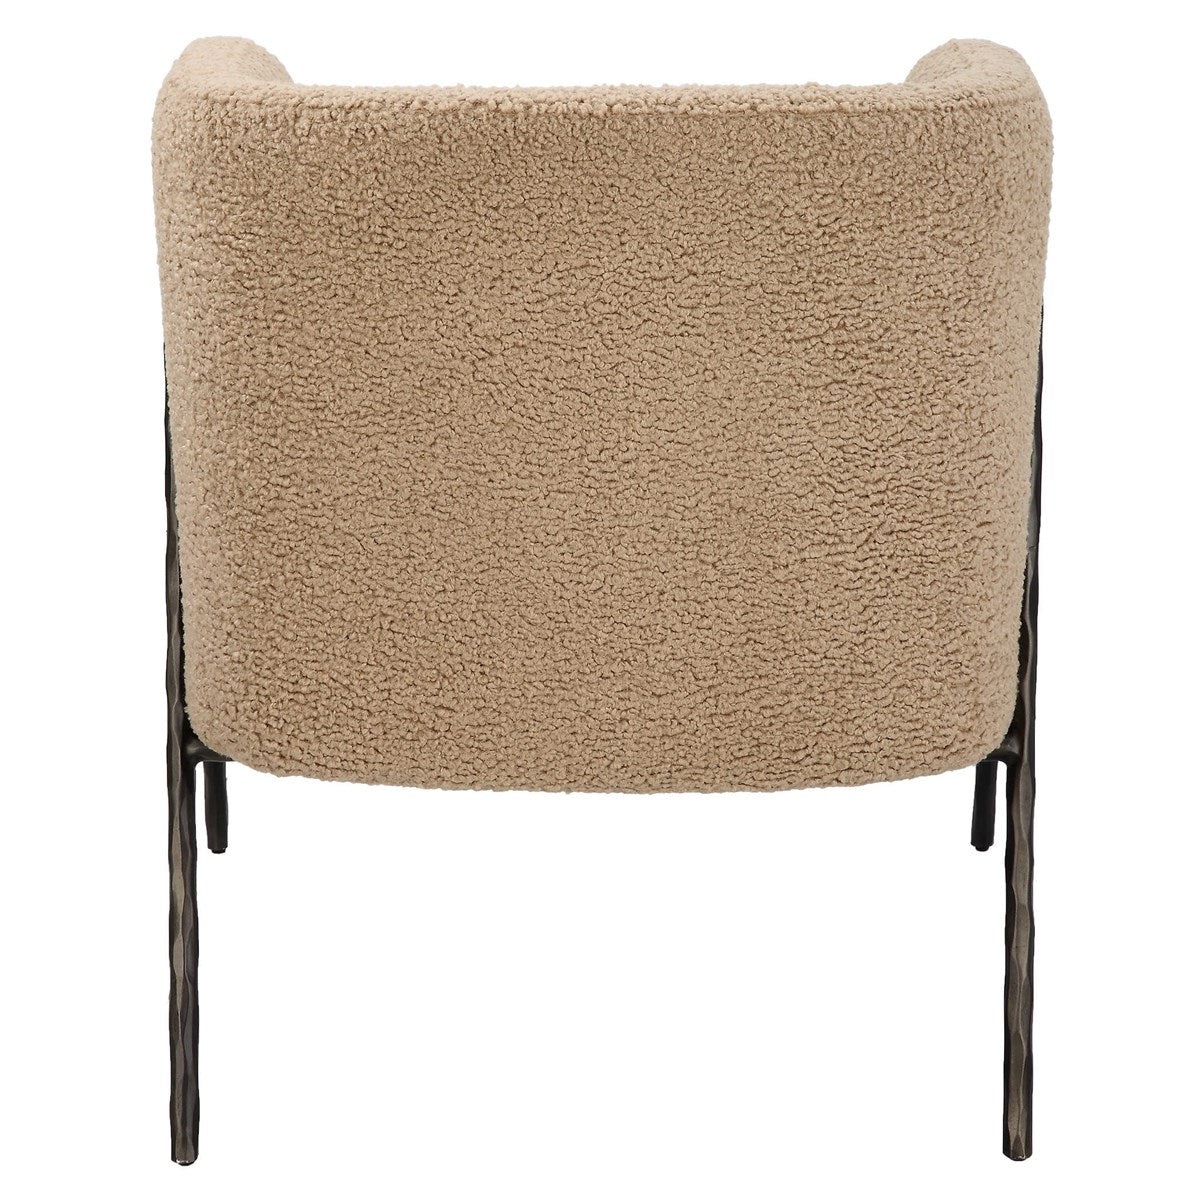 Jacobsen Accent Chair, Latte Shearling